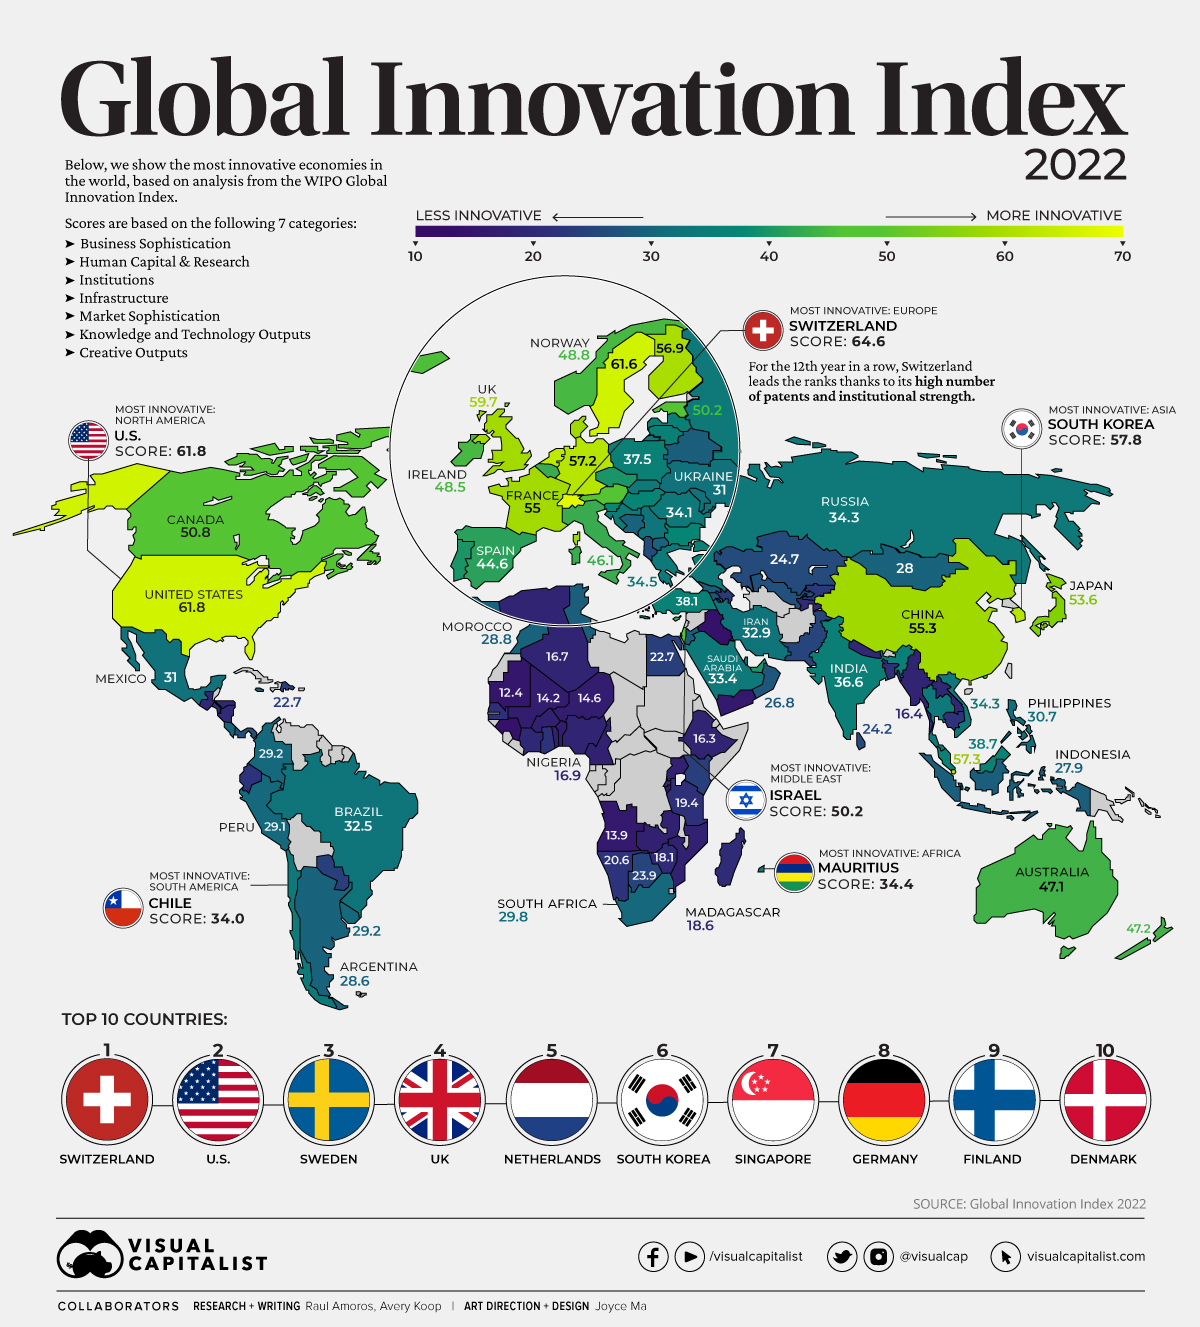 Most Innovative Countries in the World 2022